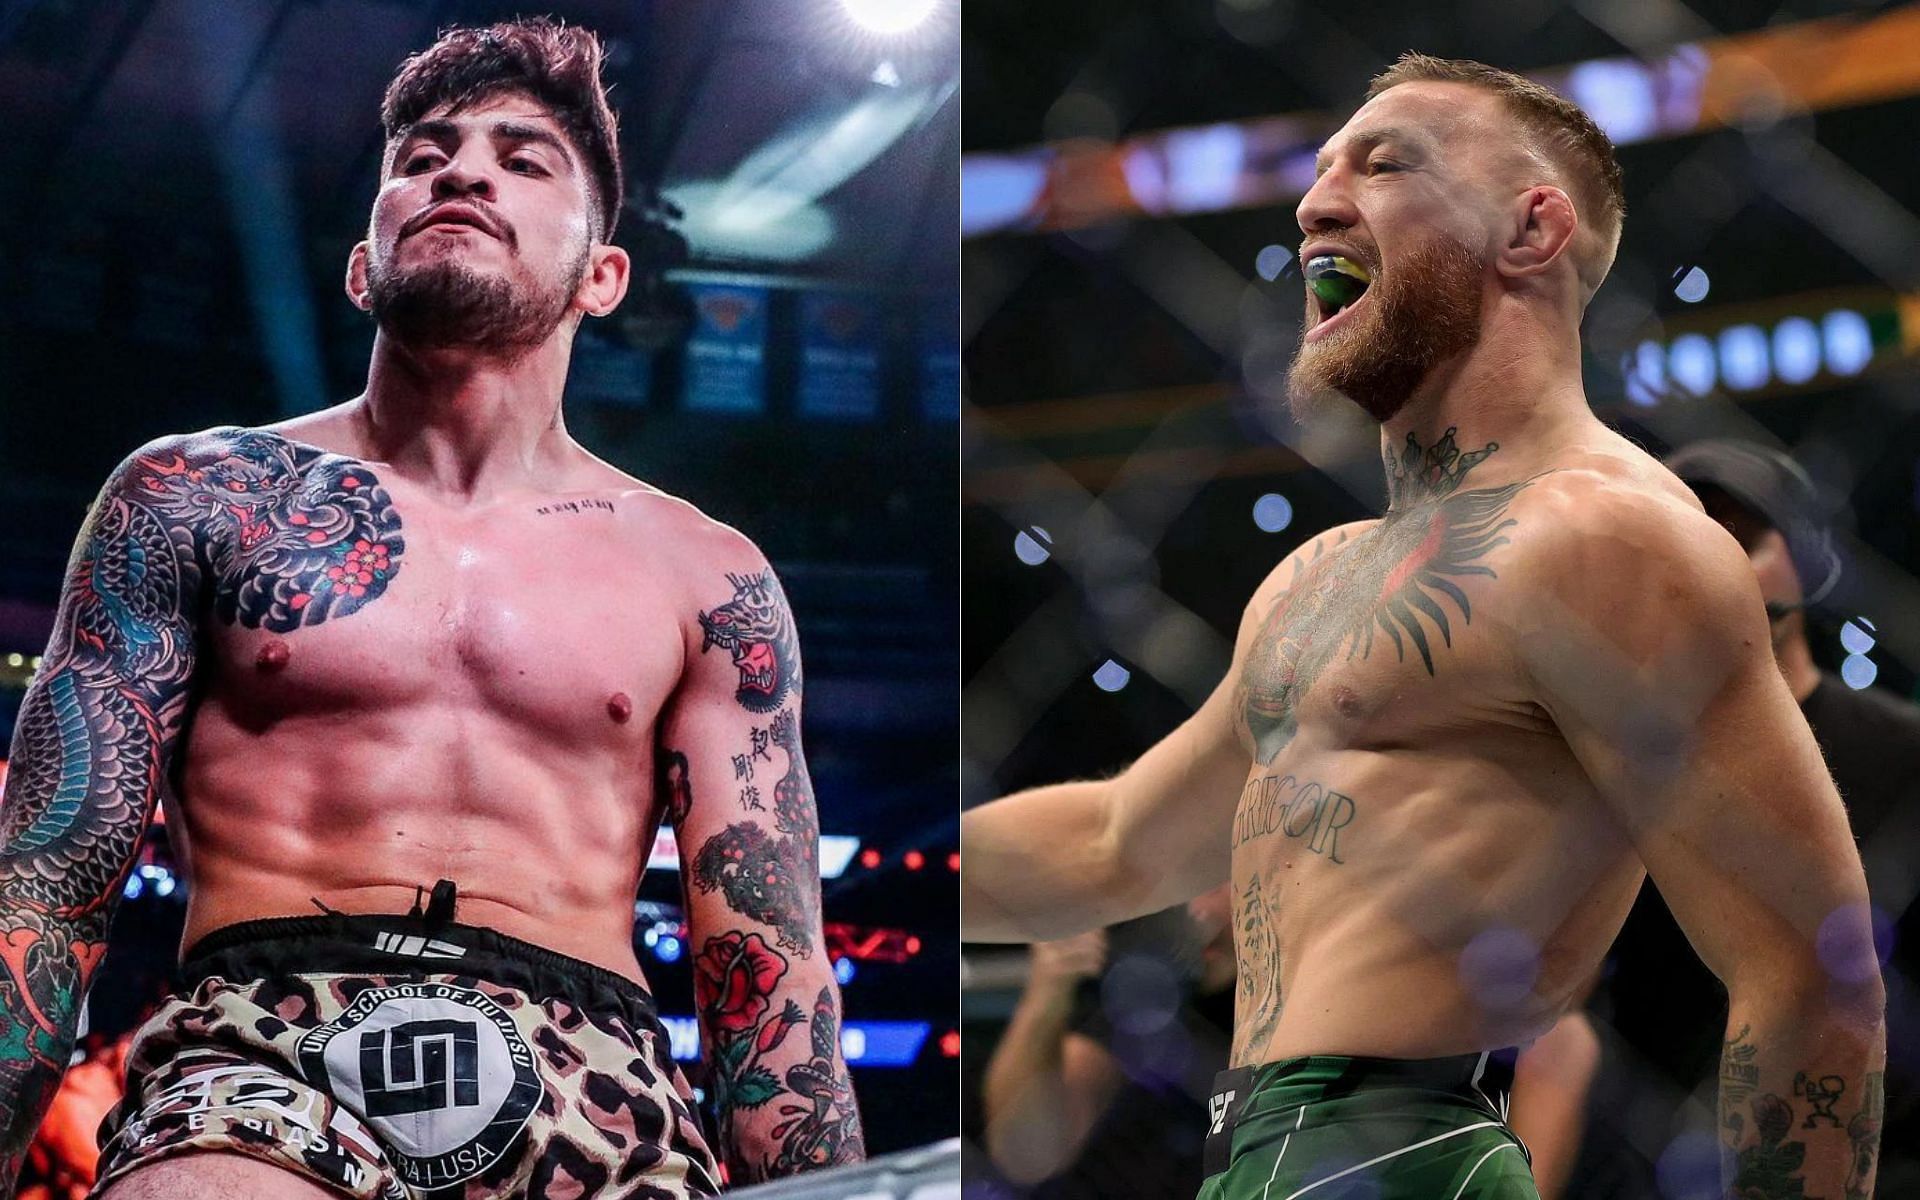 Dillon Danis (left) and Conor McGregor (right) [Image credits: @dillondanis on Instagram]